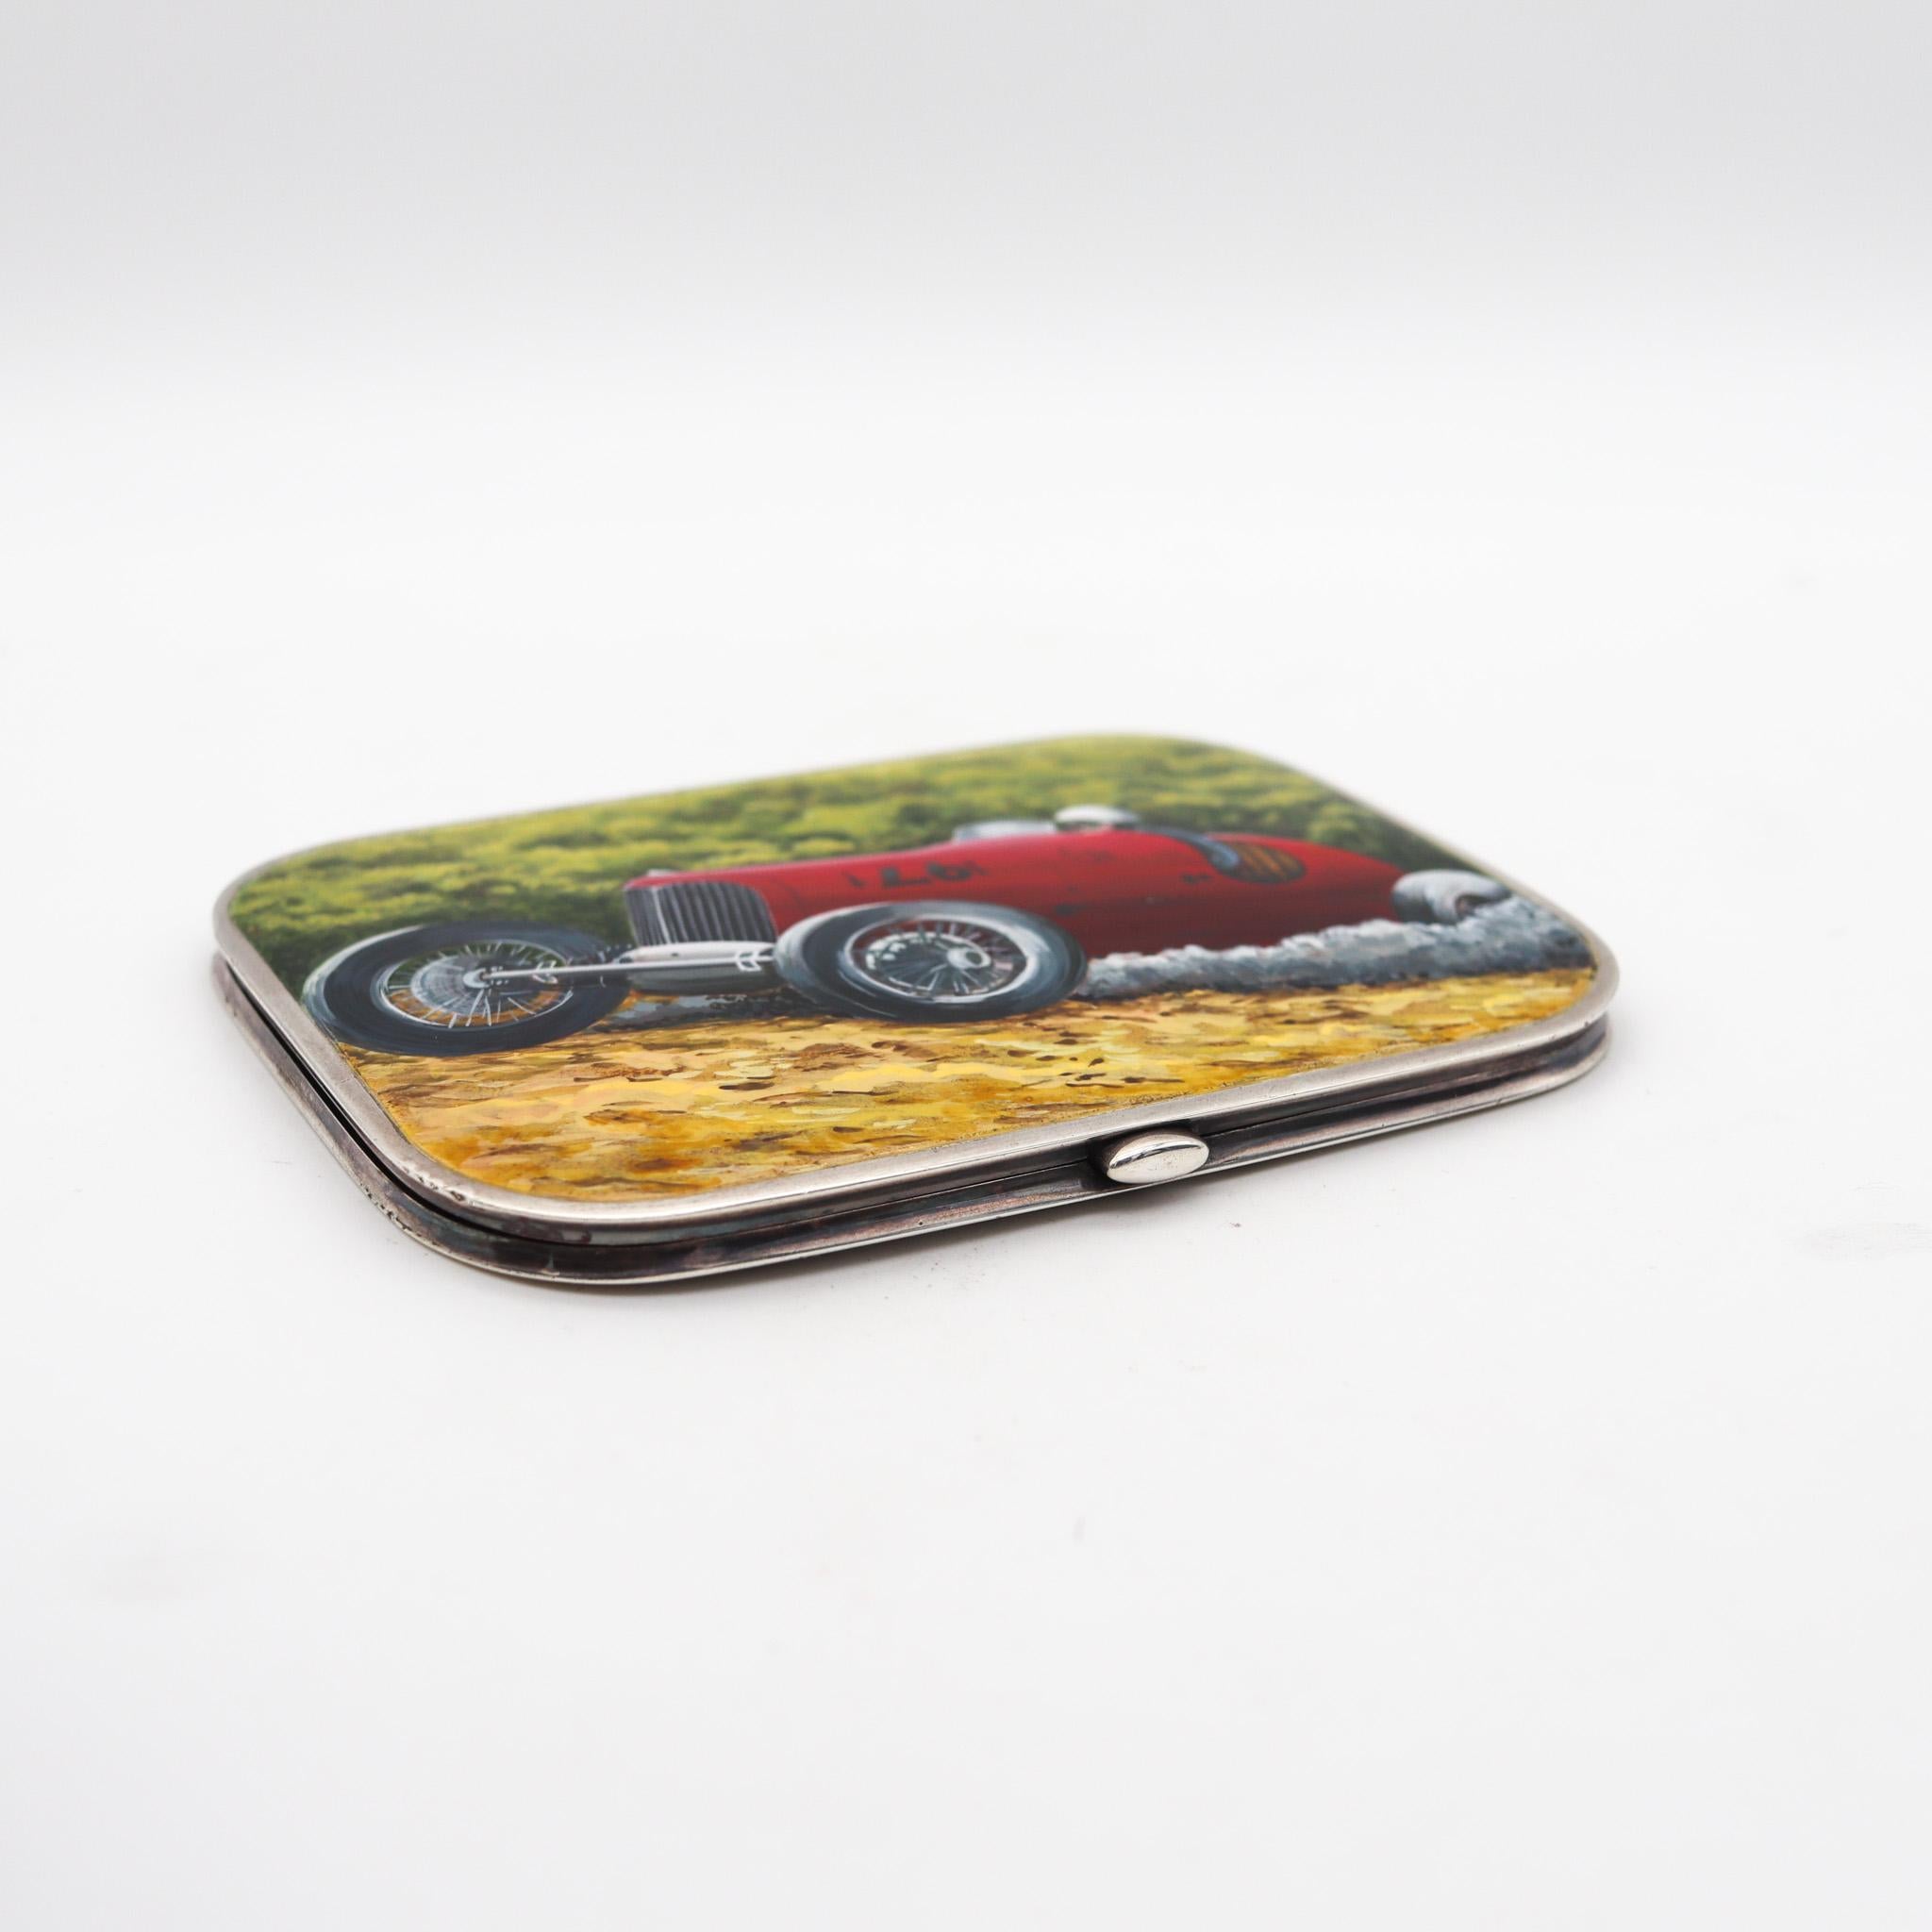 Enameled Finnigans 1932 London Art Deco Enamel Case Box With Racing Car In .925 Sterling  For Sale